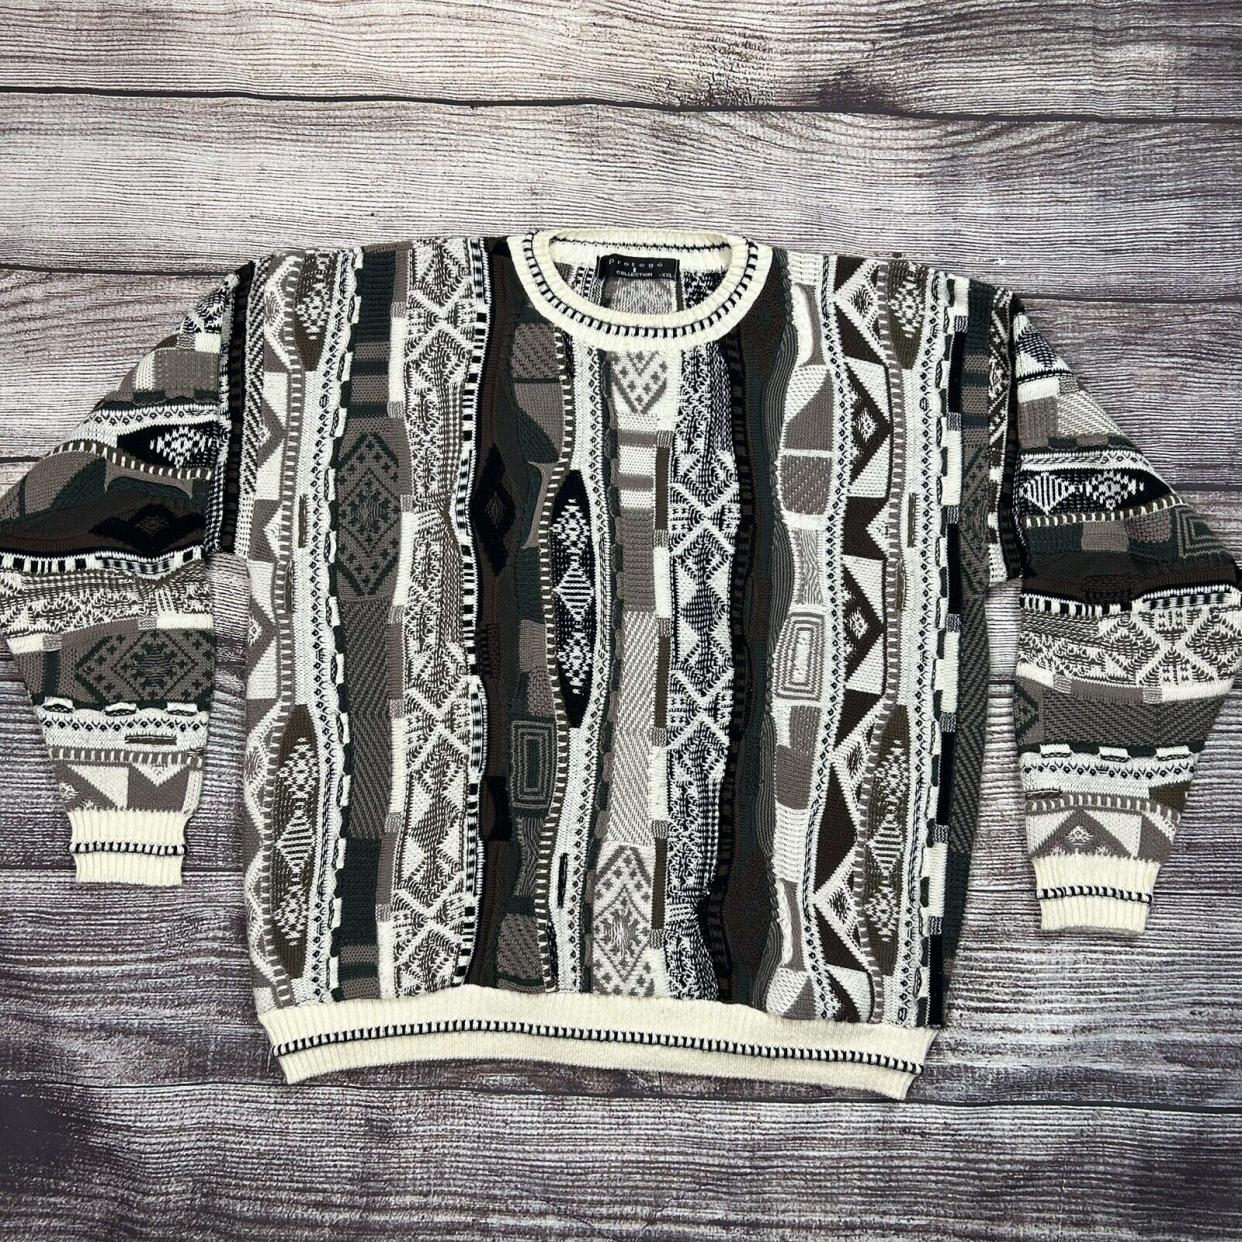 Coogi Vintage Men's Sweater, Grey, Black, and White, on Grey Wooden Boards